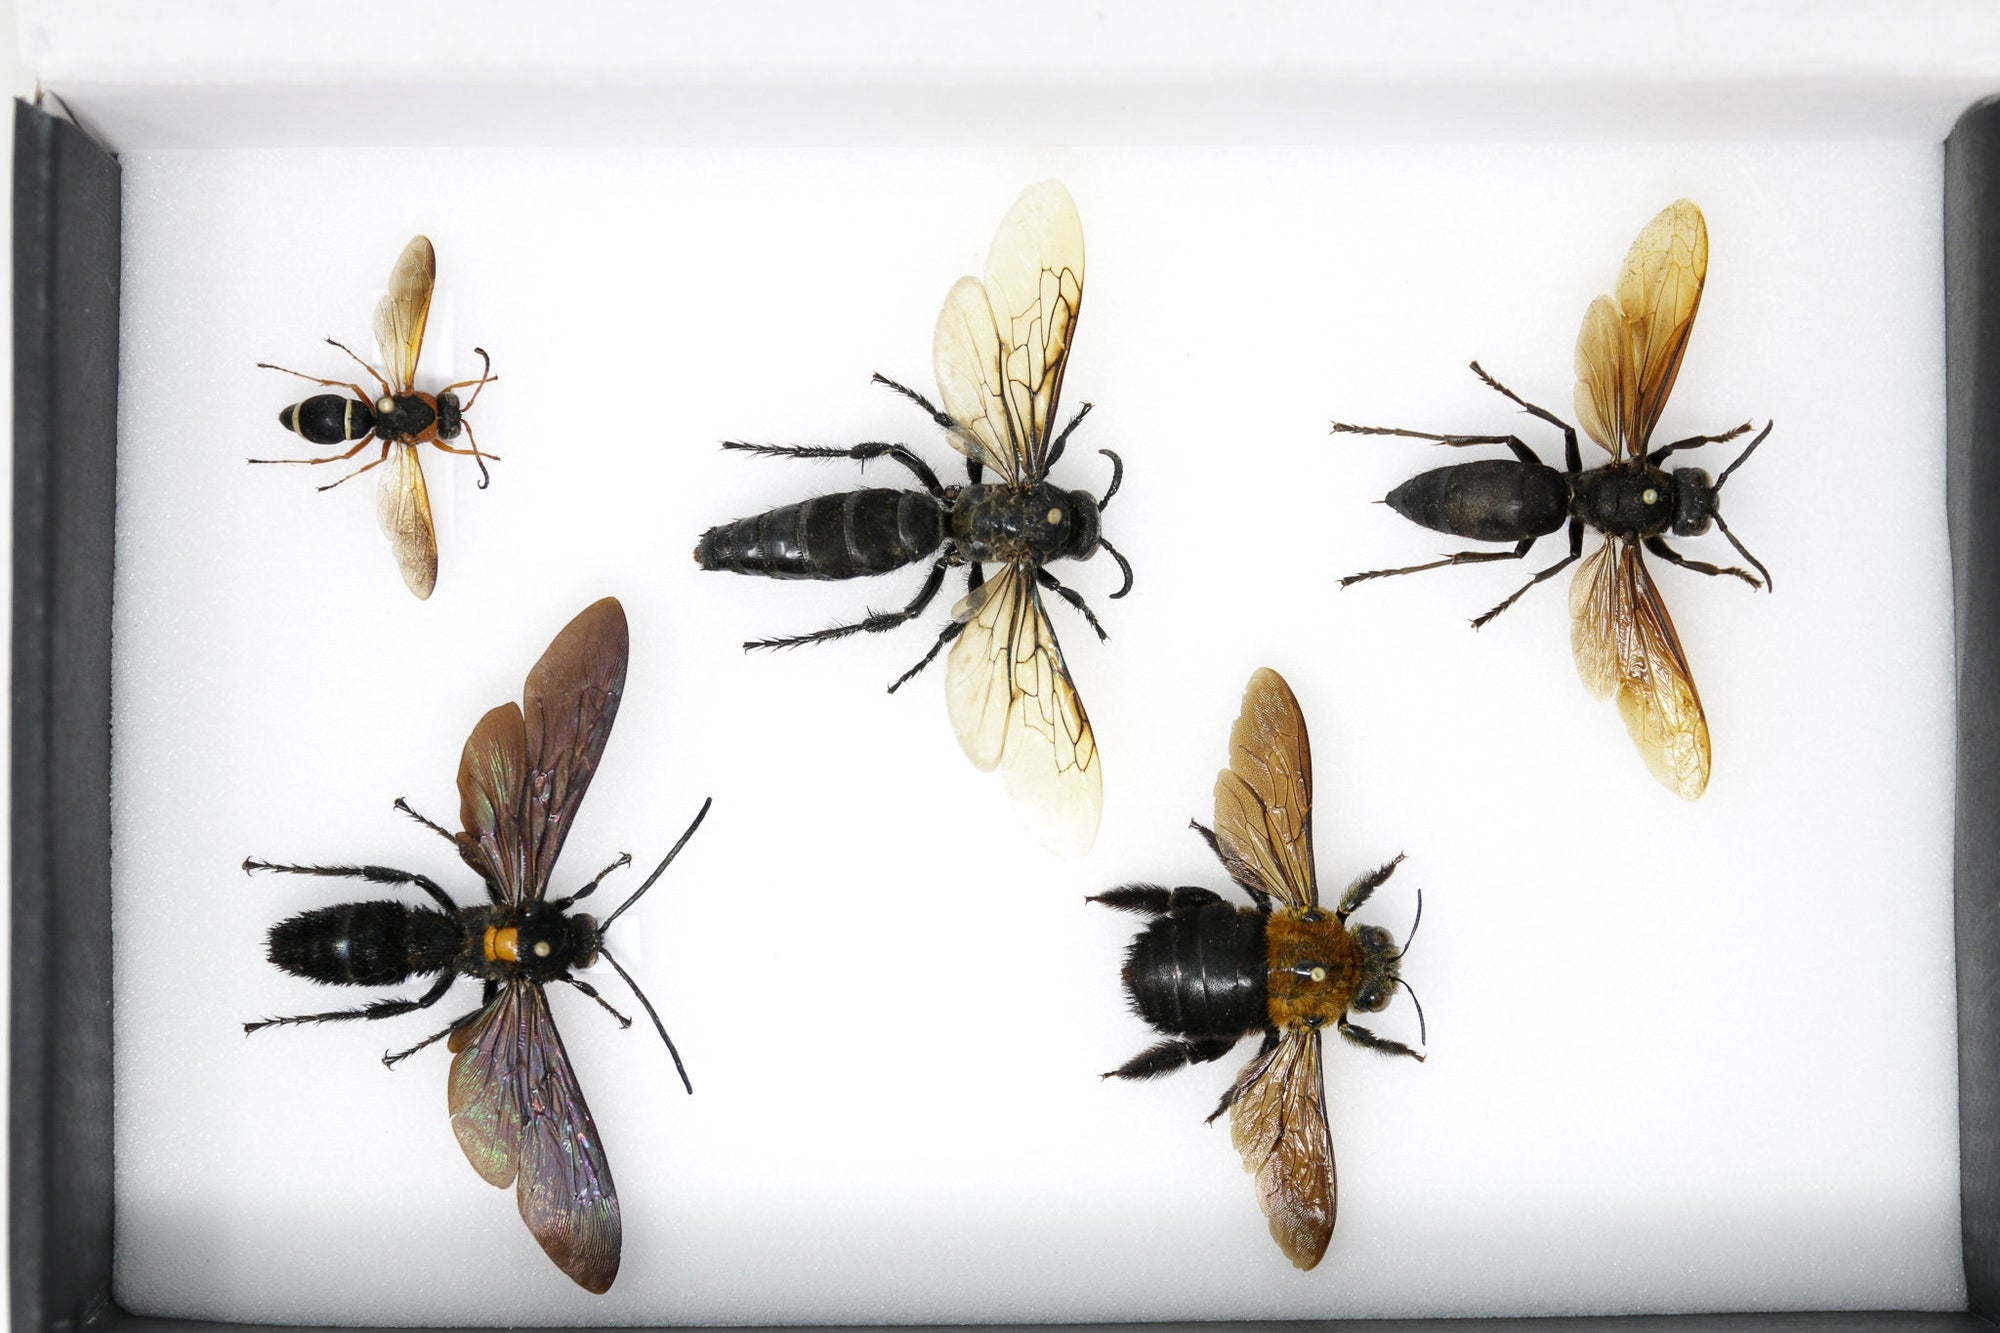 A Collection of Bees & Wasps (Hymenoptera)  inc. Scientific Collection Data, A1 Quality, Entomology, Real Insect Specimens #SE23